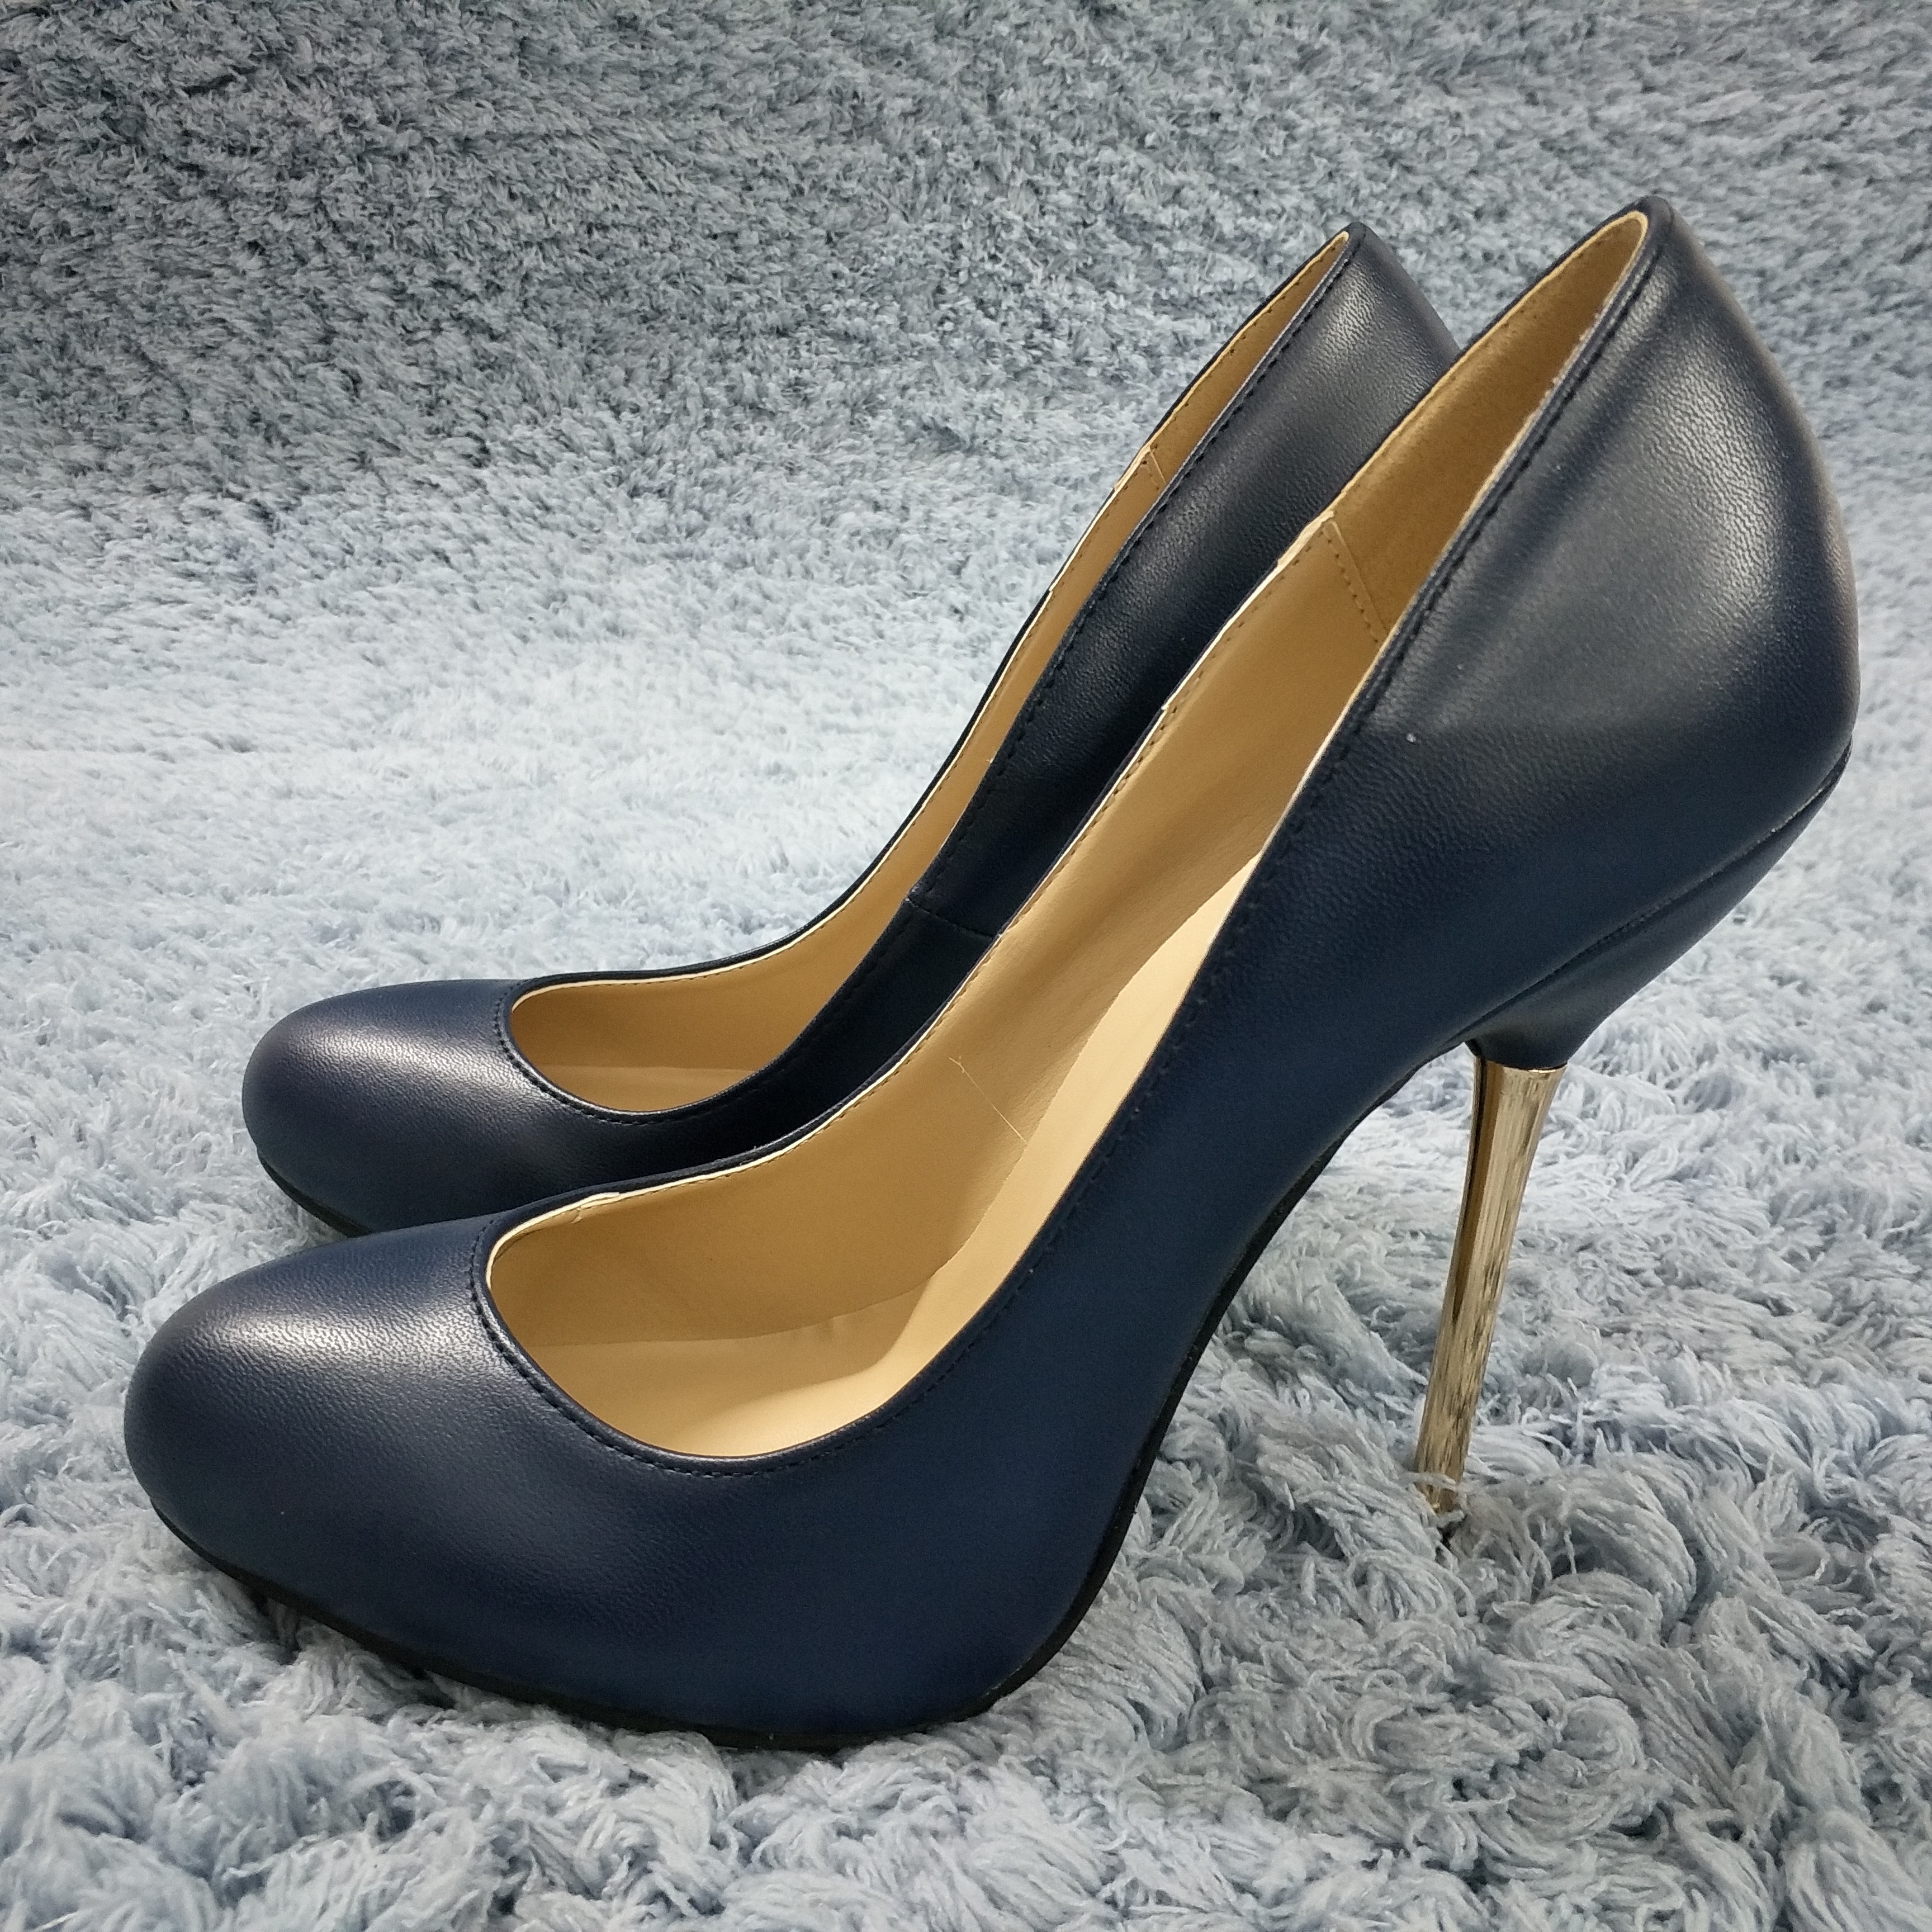 Sexy Navy Leather Pumps High Heel Office Dress Party Women Pumps Spring Autumn New Round Toe Fashion Stiletto 11cm Heels Shoes